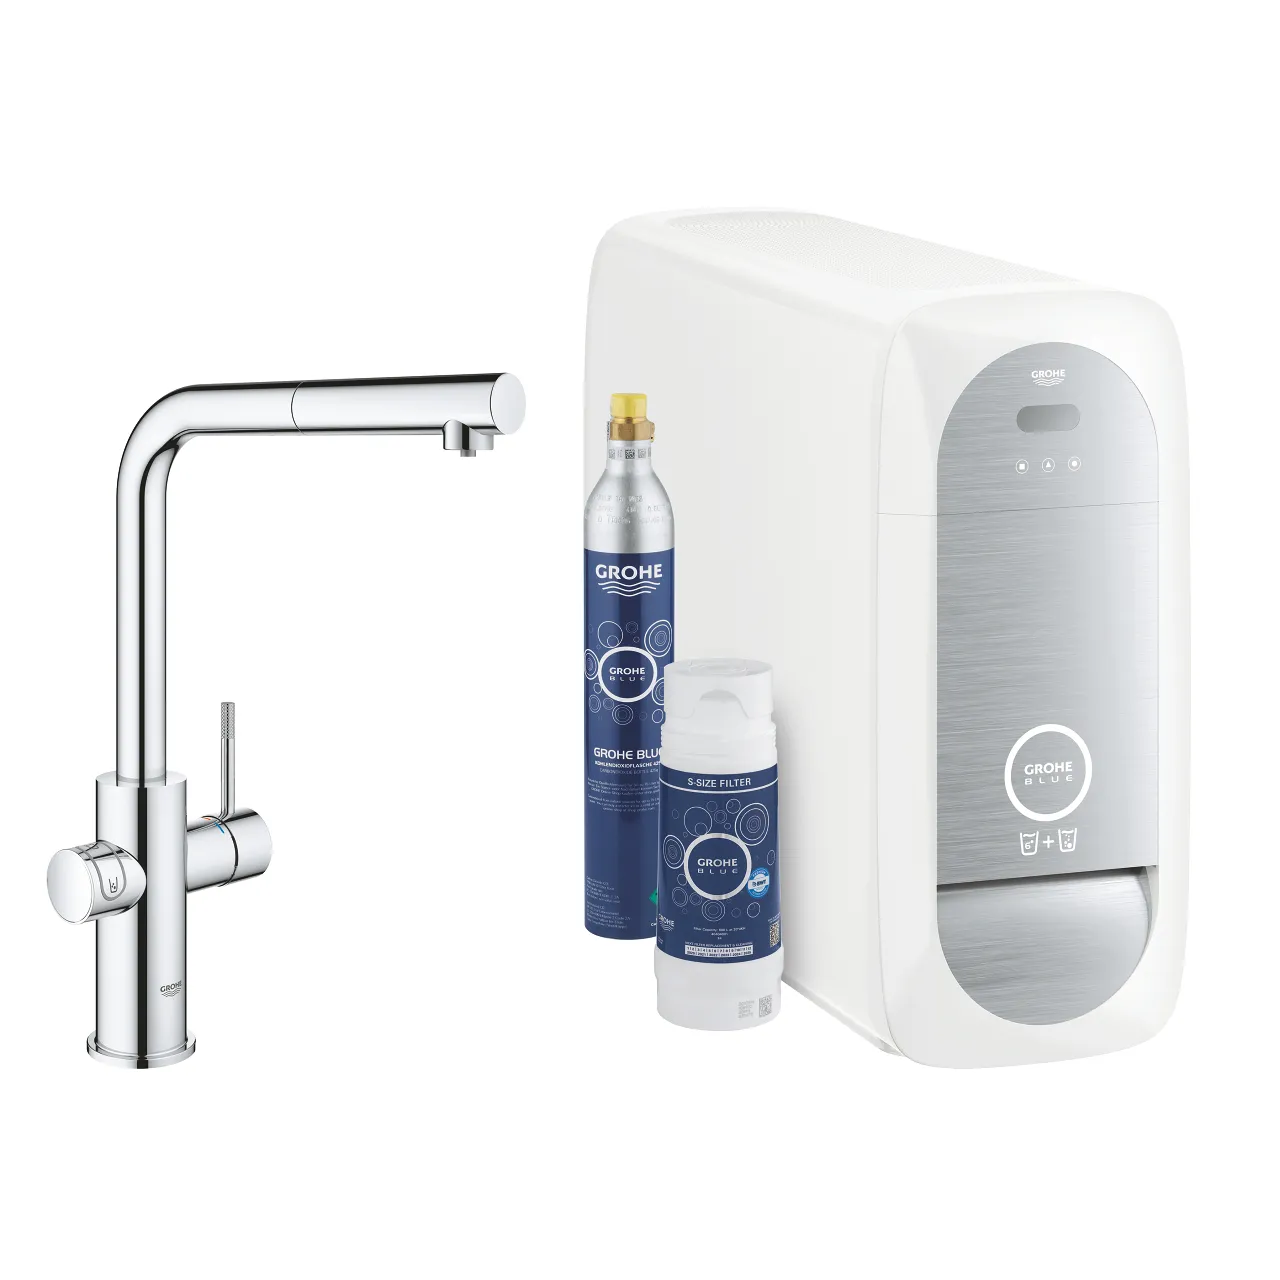 GROHE Blue Home Starter kit with extractable shower head